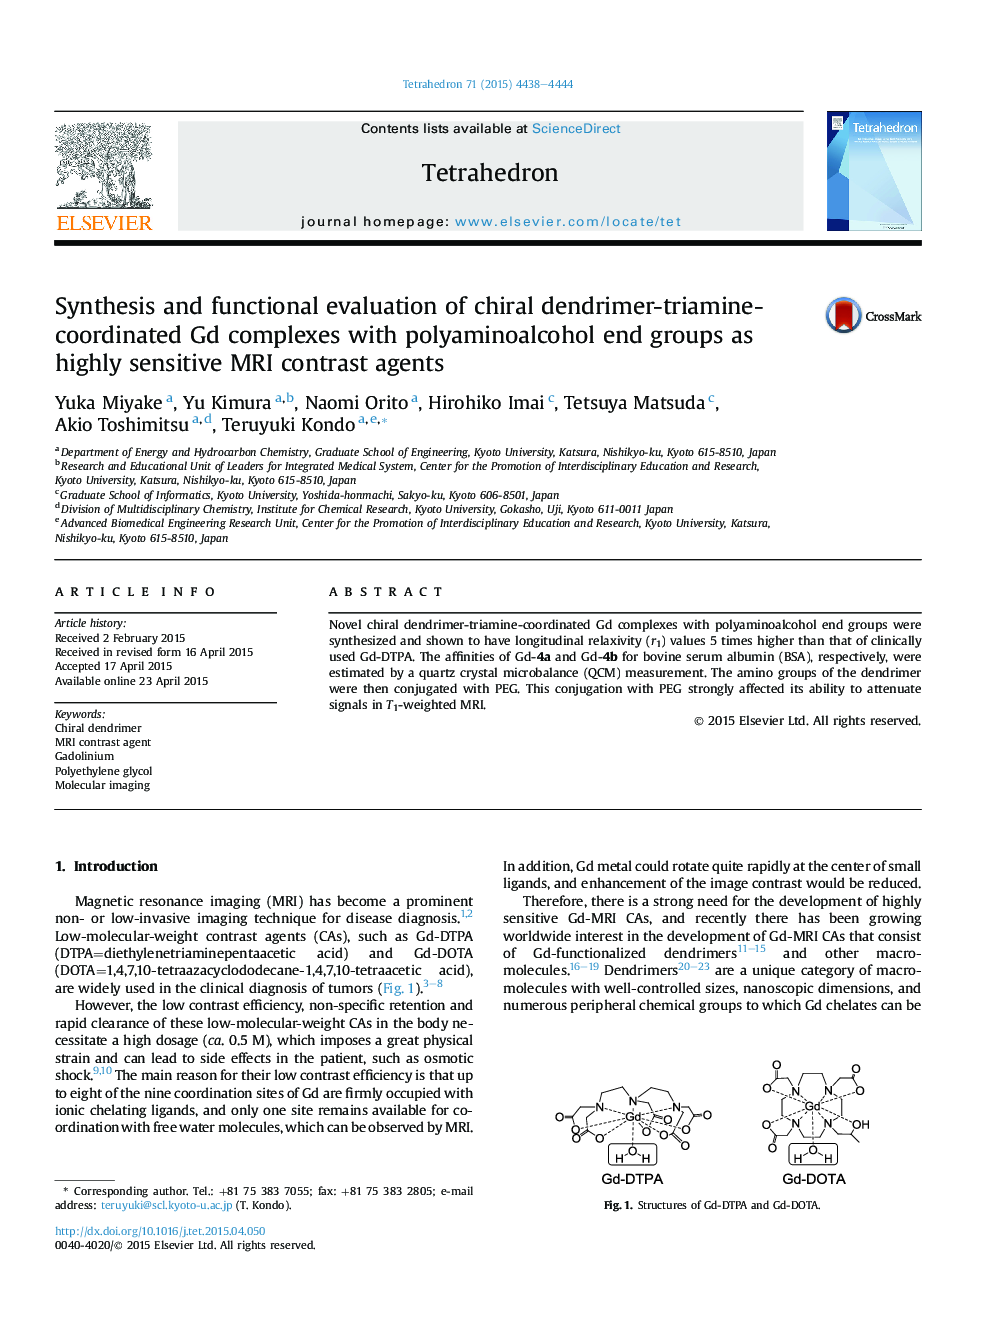 Synthesis and functional evaluation of chiral dendrimer-triamine-coordinated Gd complexes with polyaminoalcohol end groups as highly sensitive MRI contrast agents